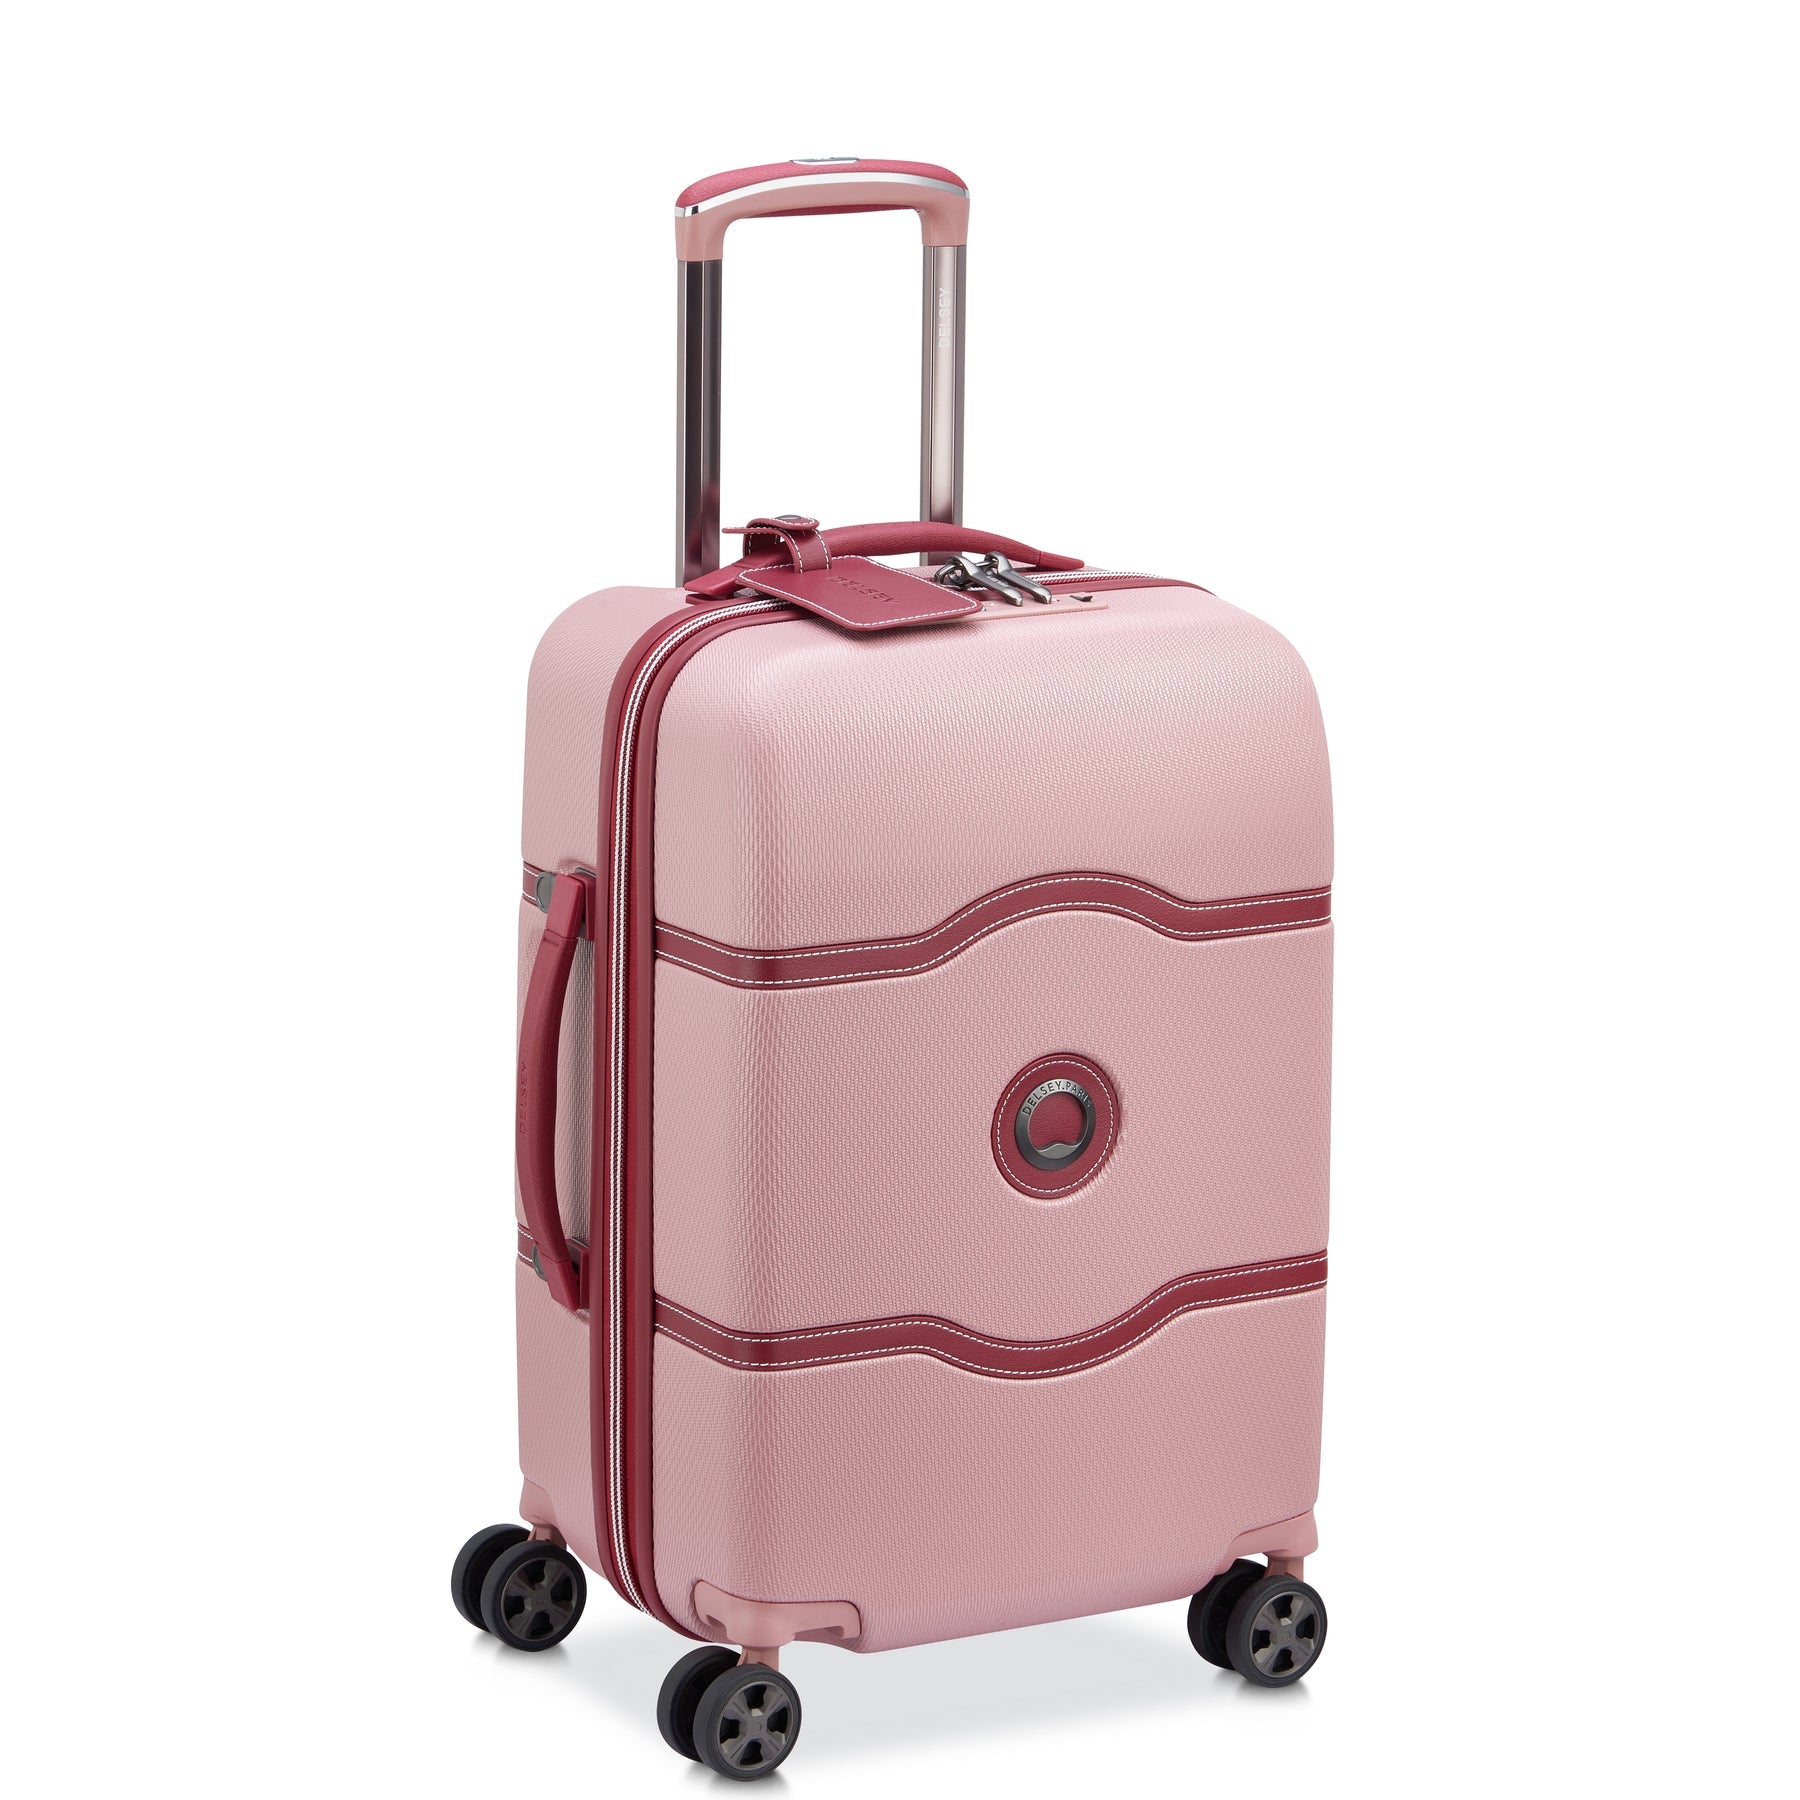 Delsey Chatelet Air 2.0 55cm Cabin Size Luggage – Pera Luggage